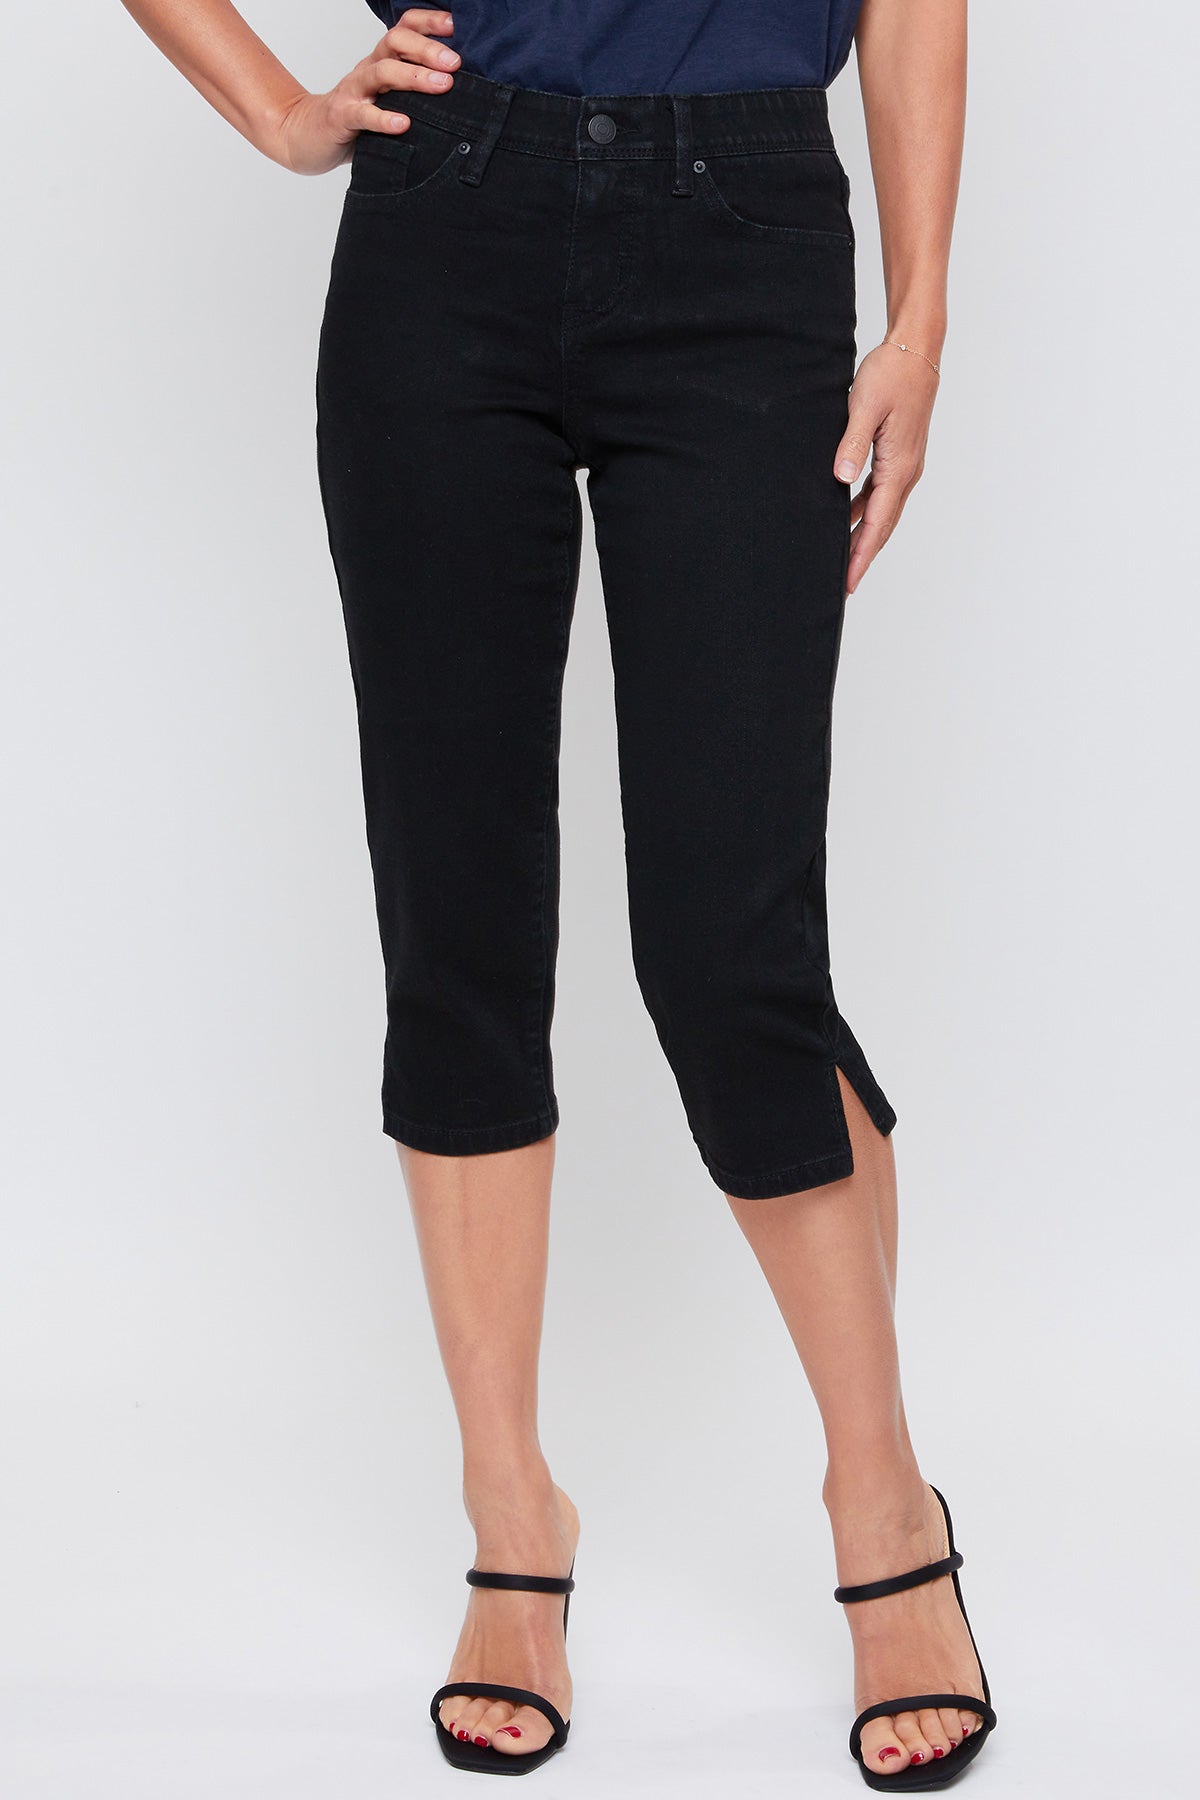 Missy Plus Size Hide Your Muffin Top High-Rise Corduroy Skinny Pant 12 Pack from Royalty for Me